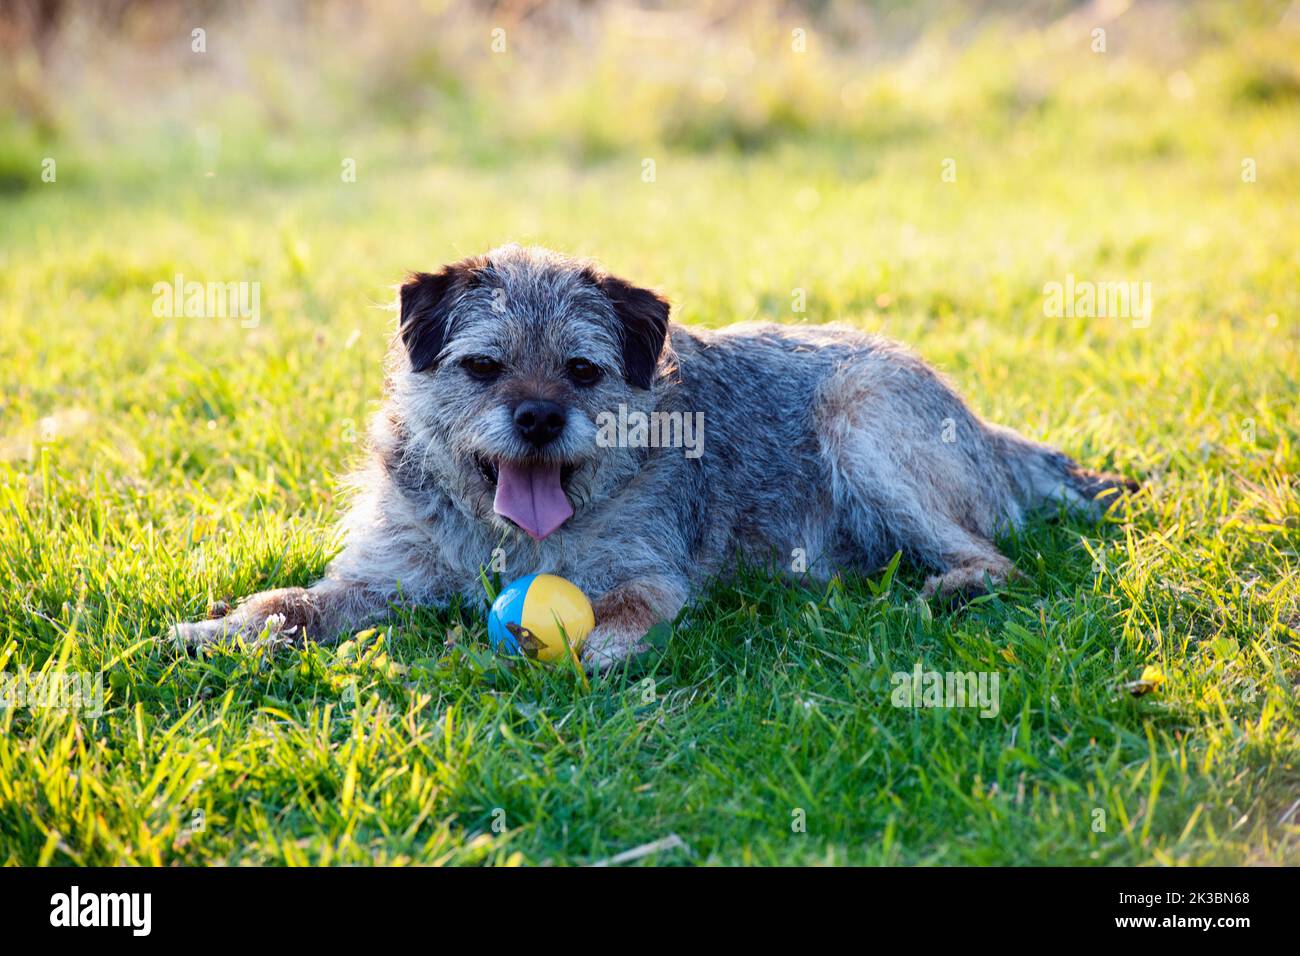 10 year old Border Terrier with ball Stock Photo